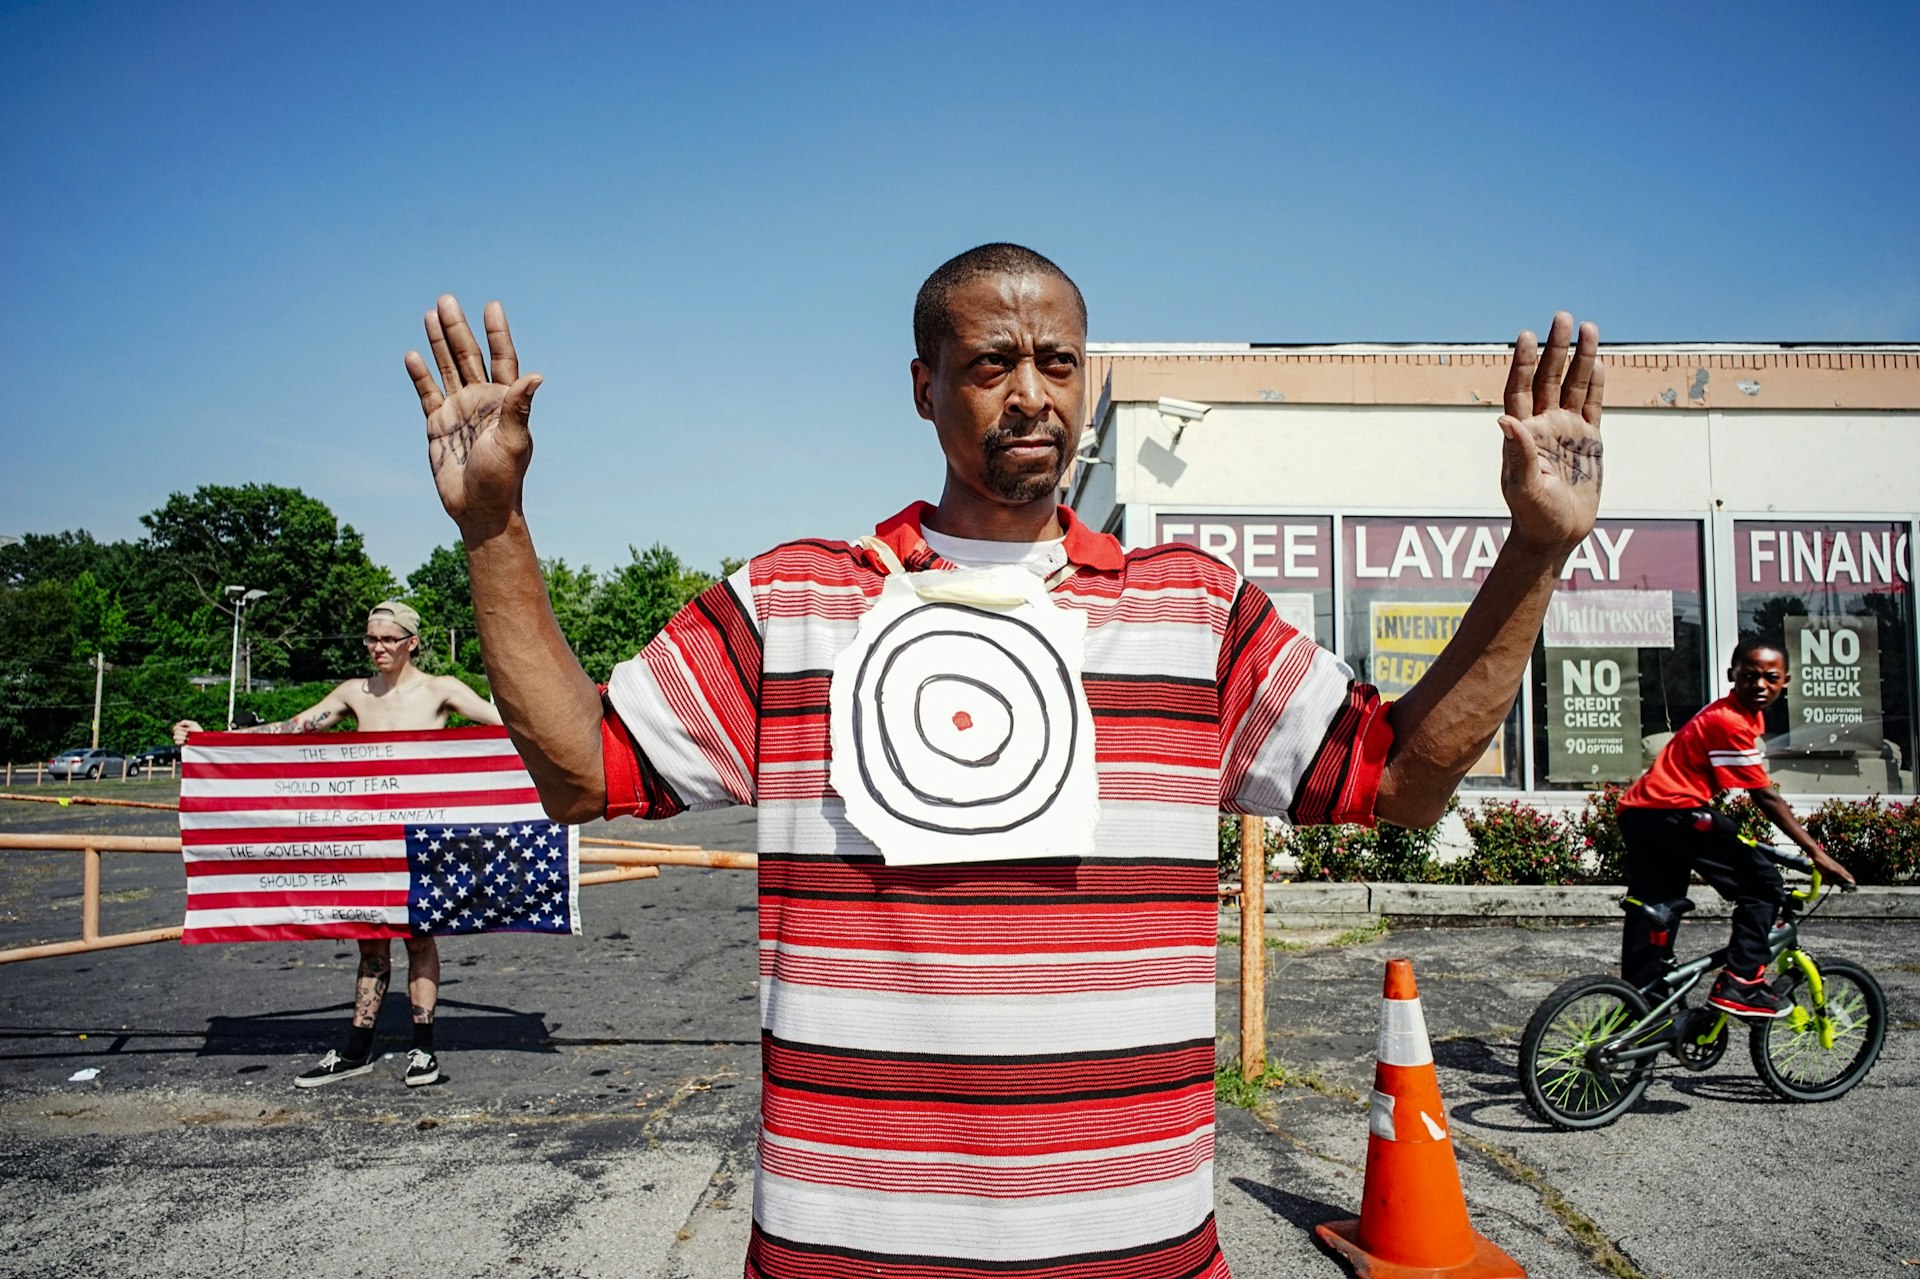 "Someone has to stand up to these crooked cops and now is the time," says Lawrence McNair while standing on Florissant Street in Ferguson, Missouri.